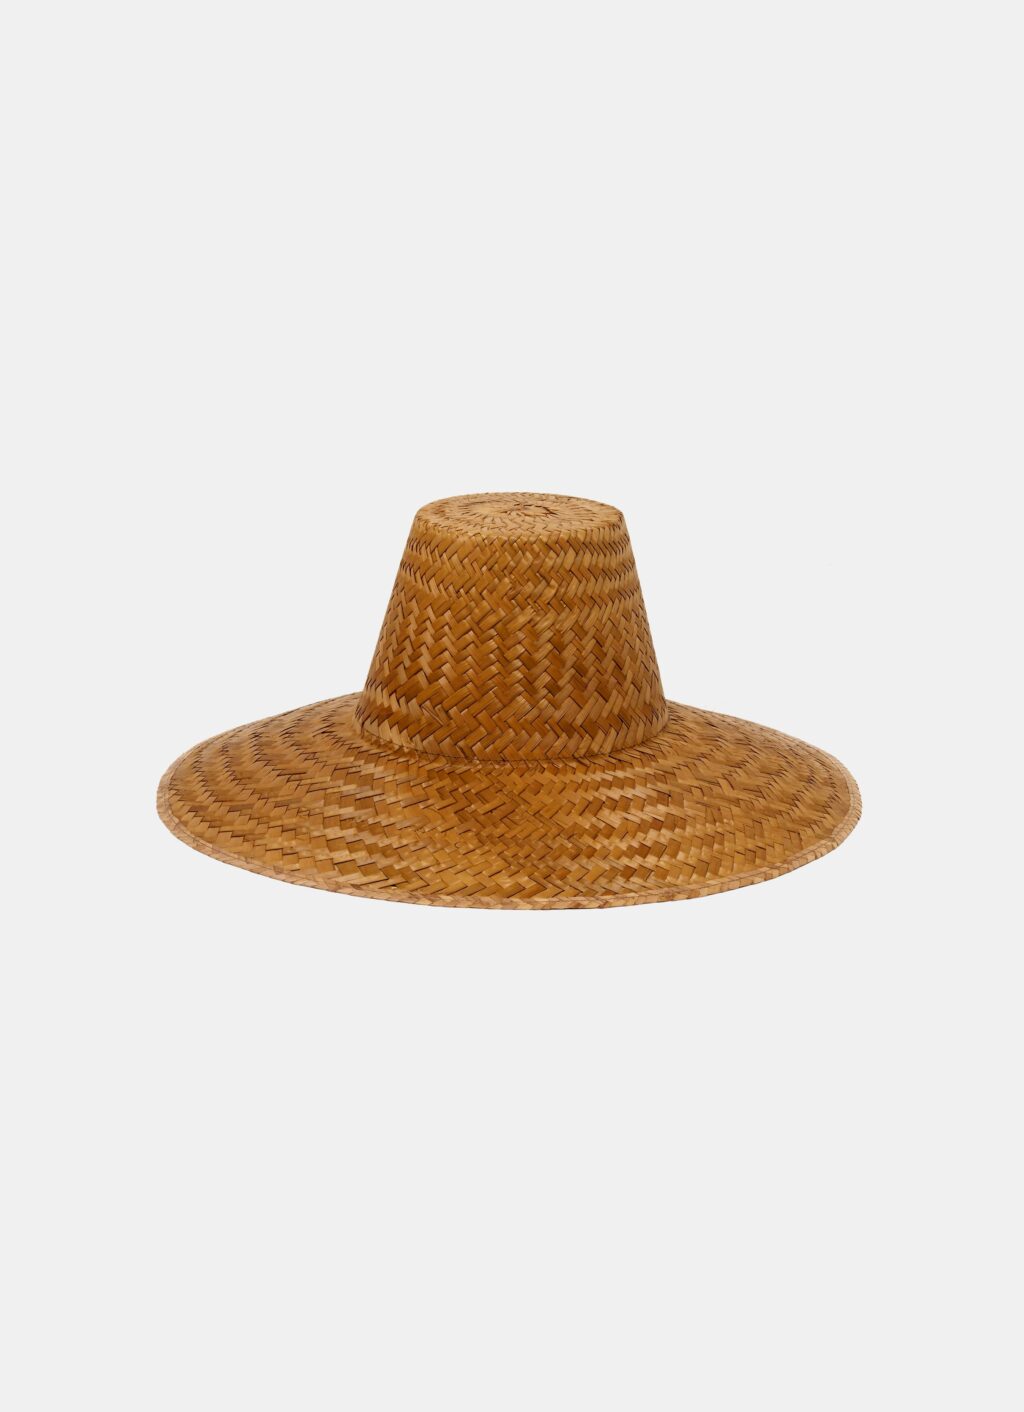 Communitie Marfa - Pinto Canyon Hat - Cooked Palm Straw